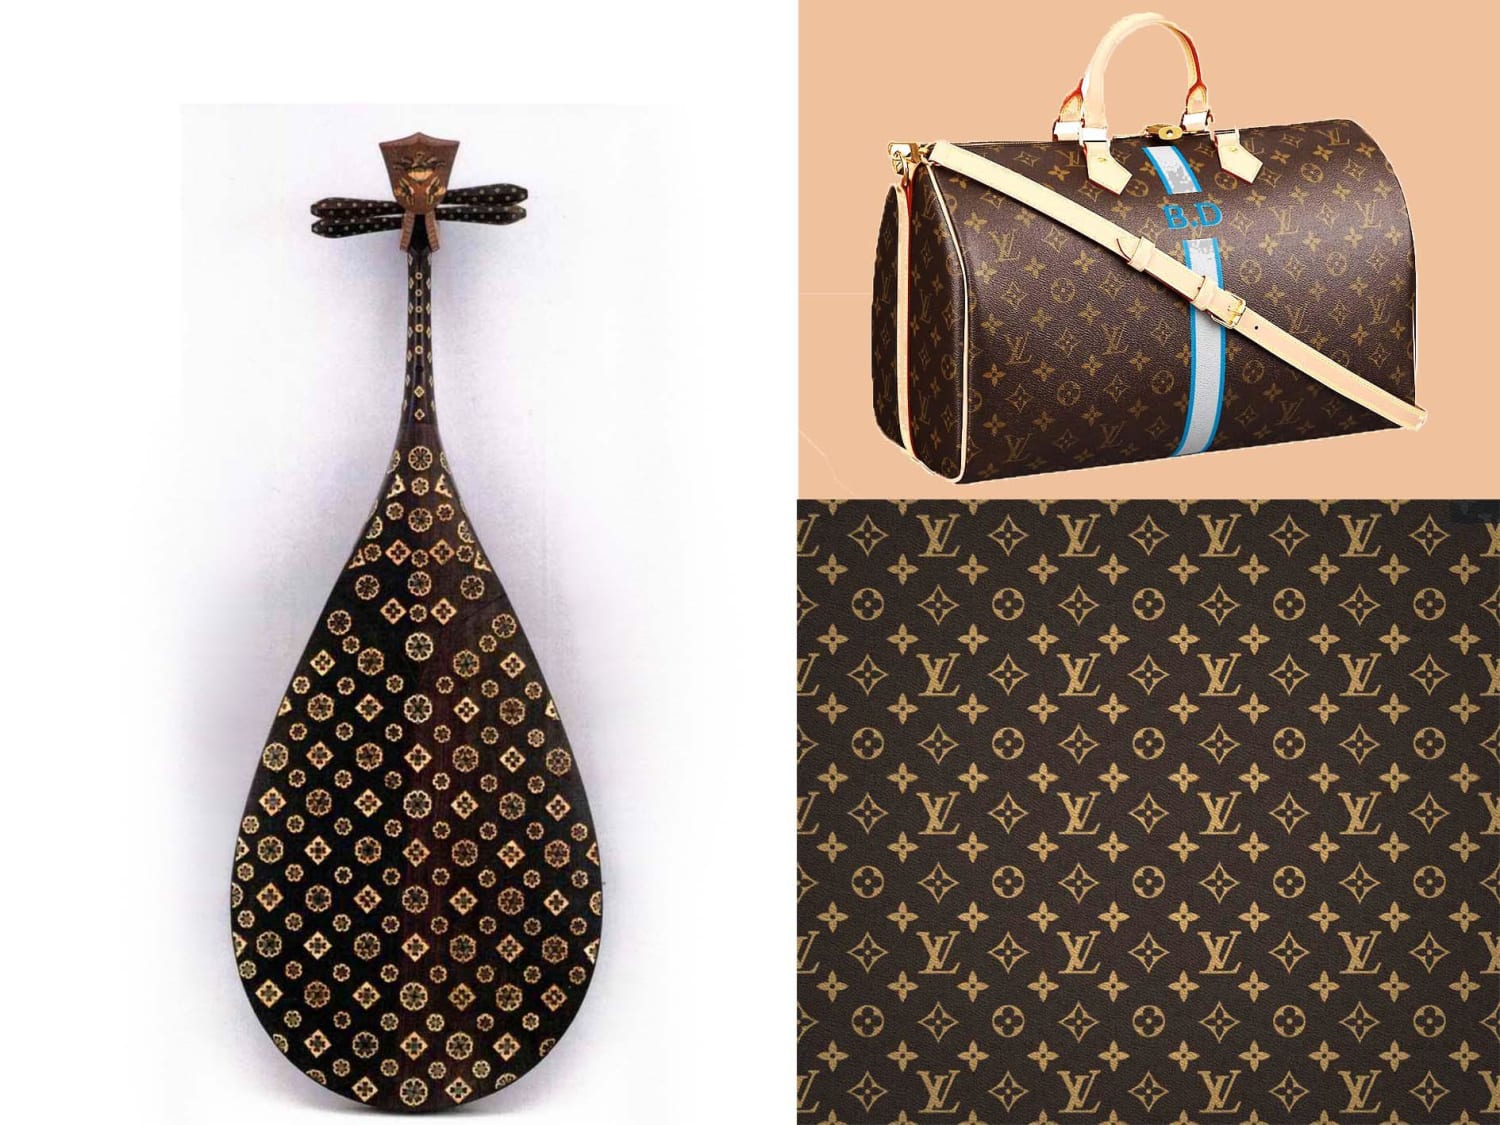 8th century Tang dynasty Pipa, "The Inspiration behind The Iconic Louis Vuitton Monogram Motive" It was gifted to Japan by Tang dynasty Emperor Xuanzong (685 AD-762 AD), it has four strings